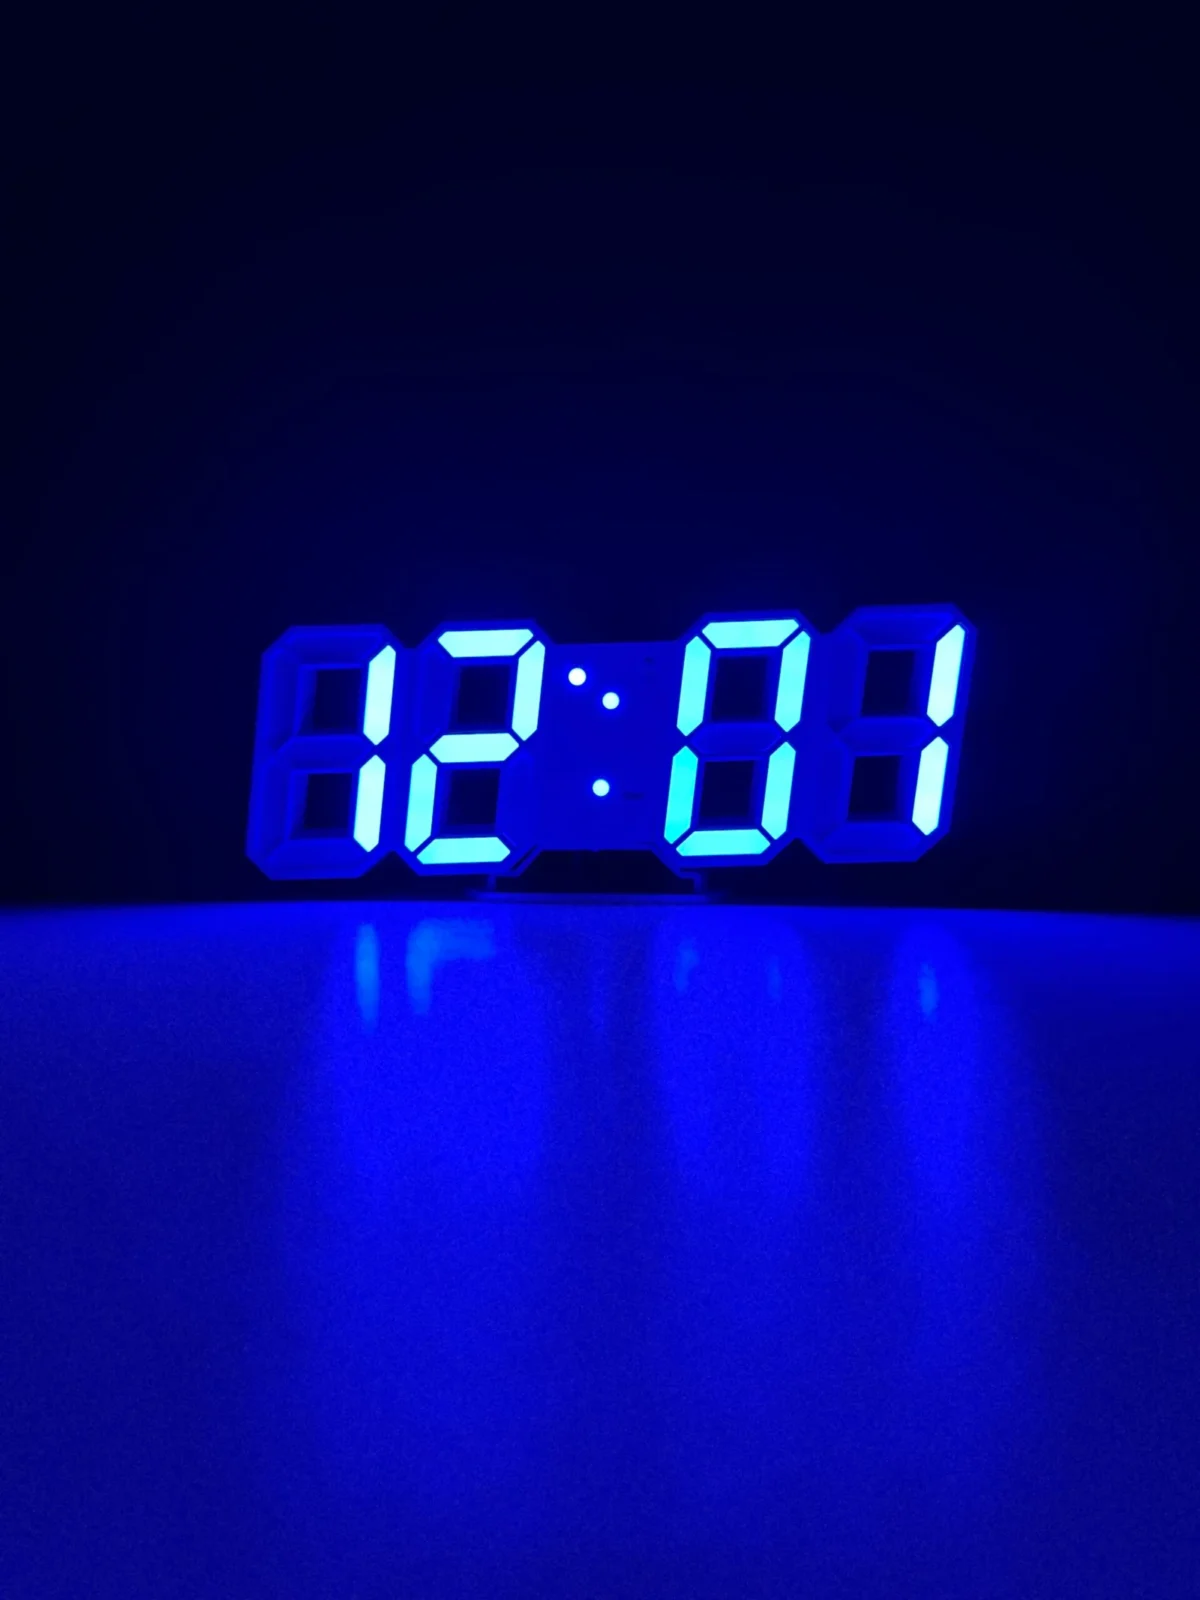 3D LED Digital Clock Glowing Decoration Wall or Table Clock